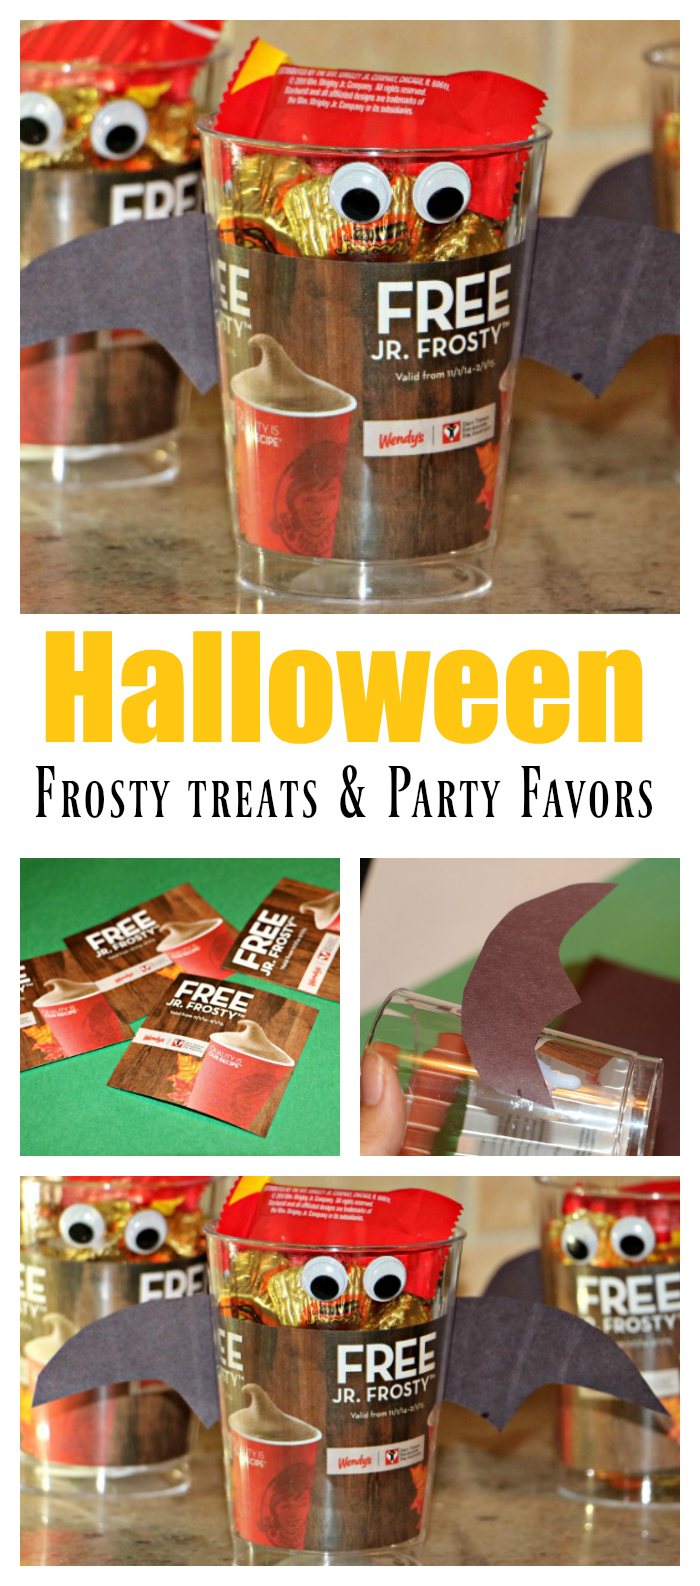 Super easy treats and party favors for Halloween using Wendy's Frosty coupon books - makes a fun kid's craft and decoration idea too!